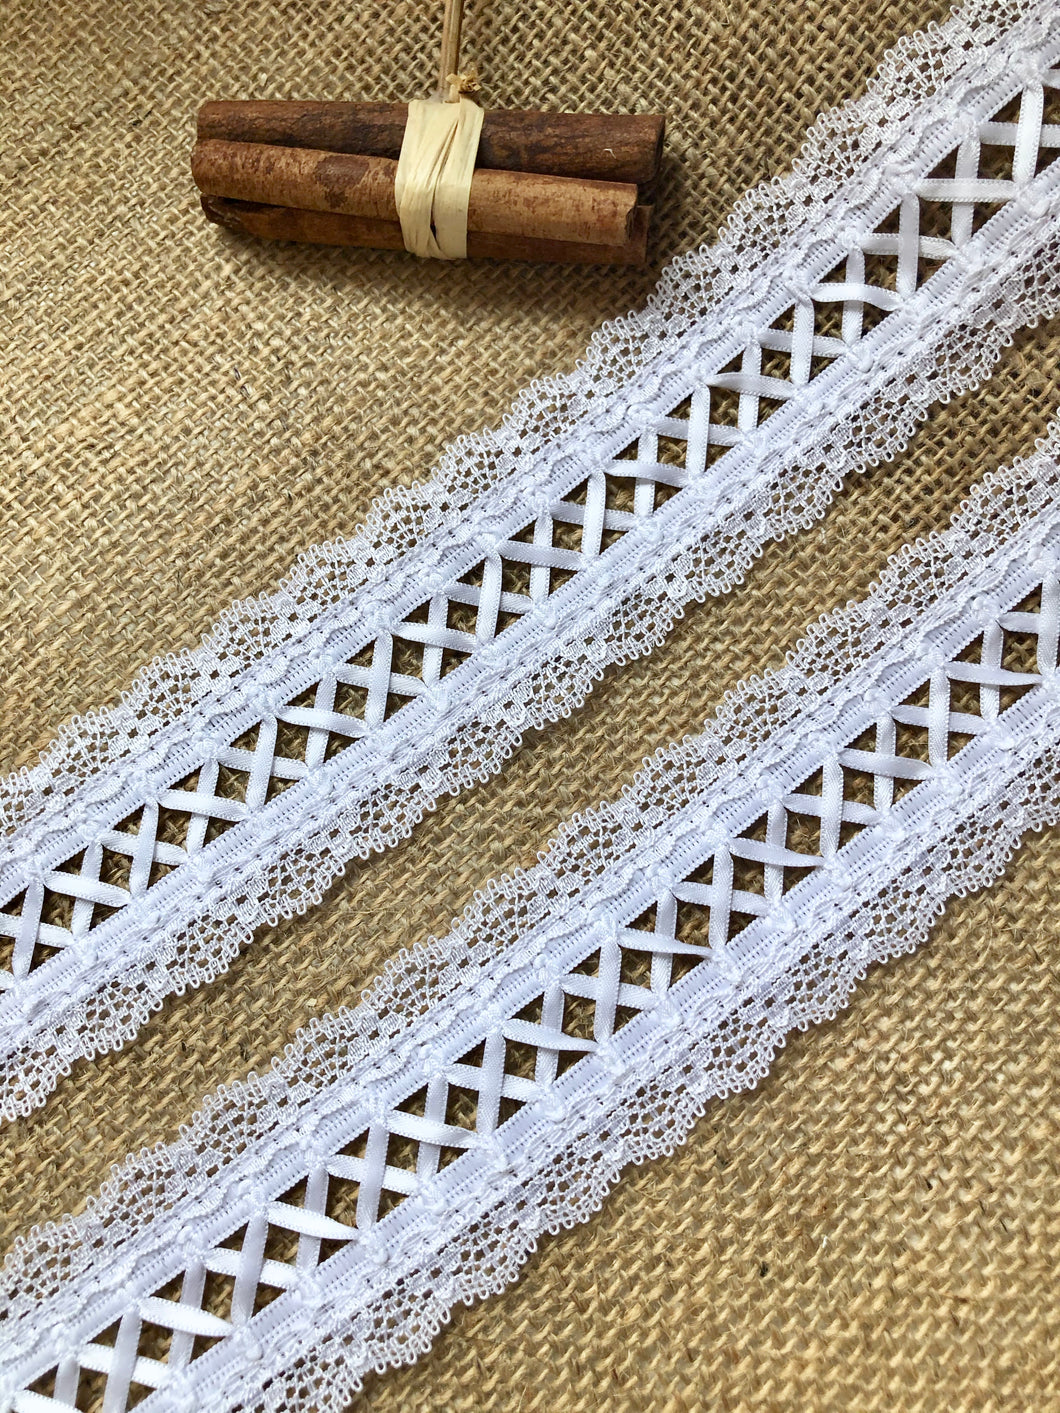 Narrow Trimmings, Crafts & Embellishment – The Lace Co.